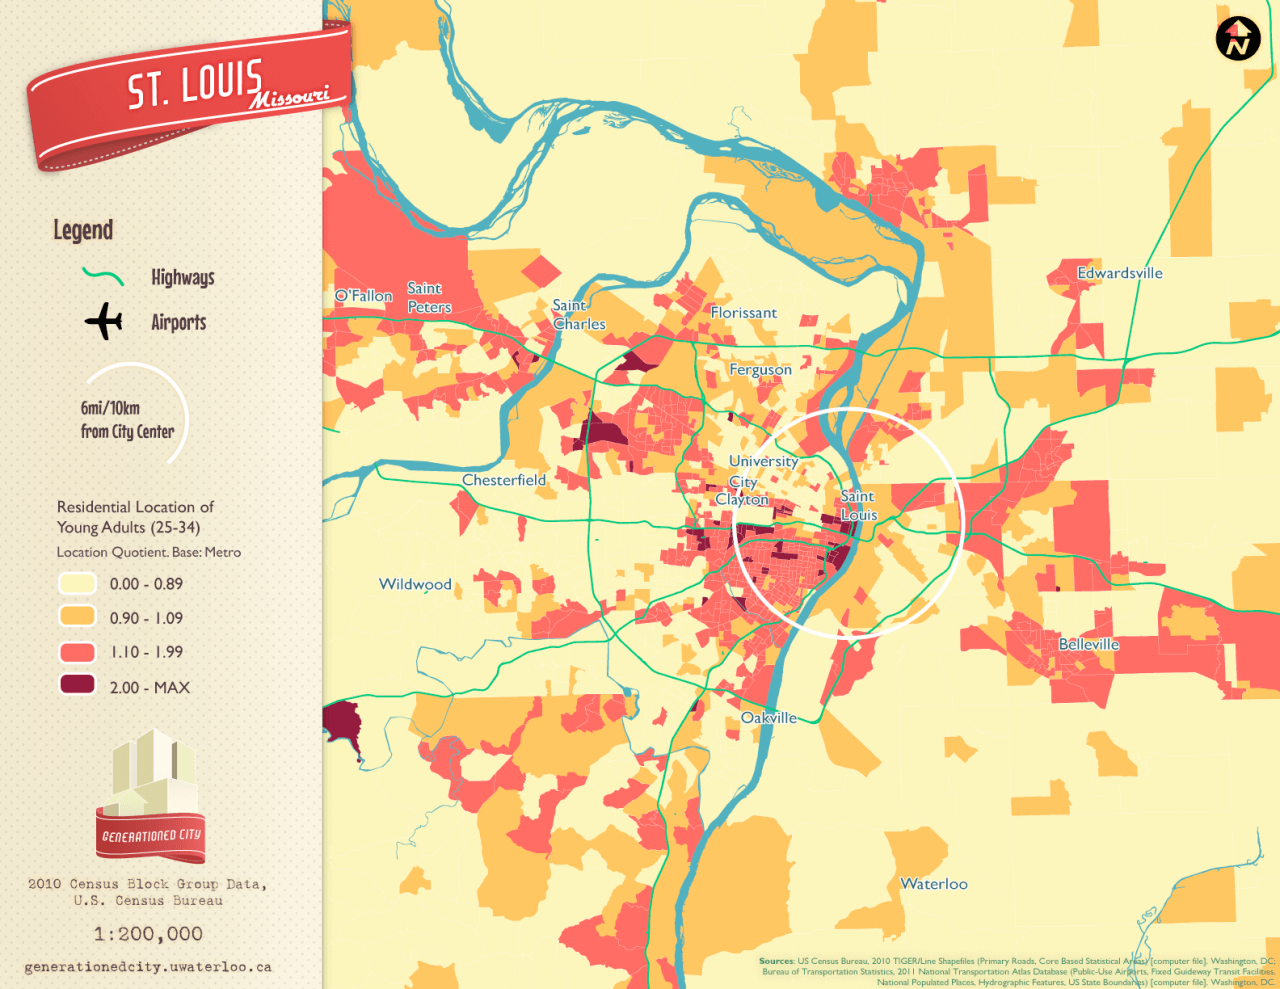 Residential location of young adults in St. Louis.